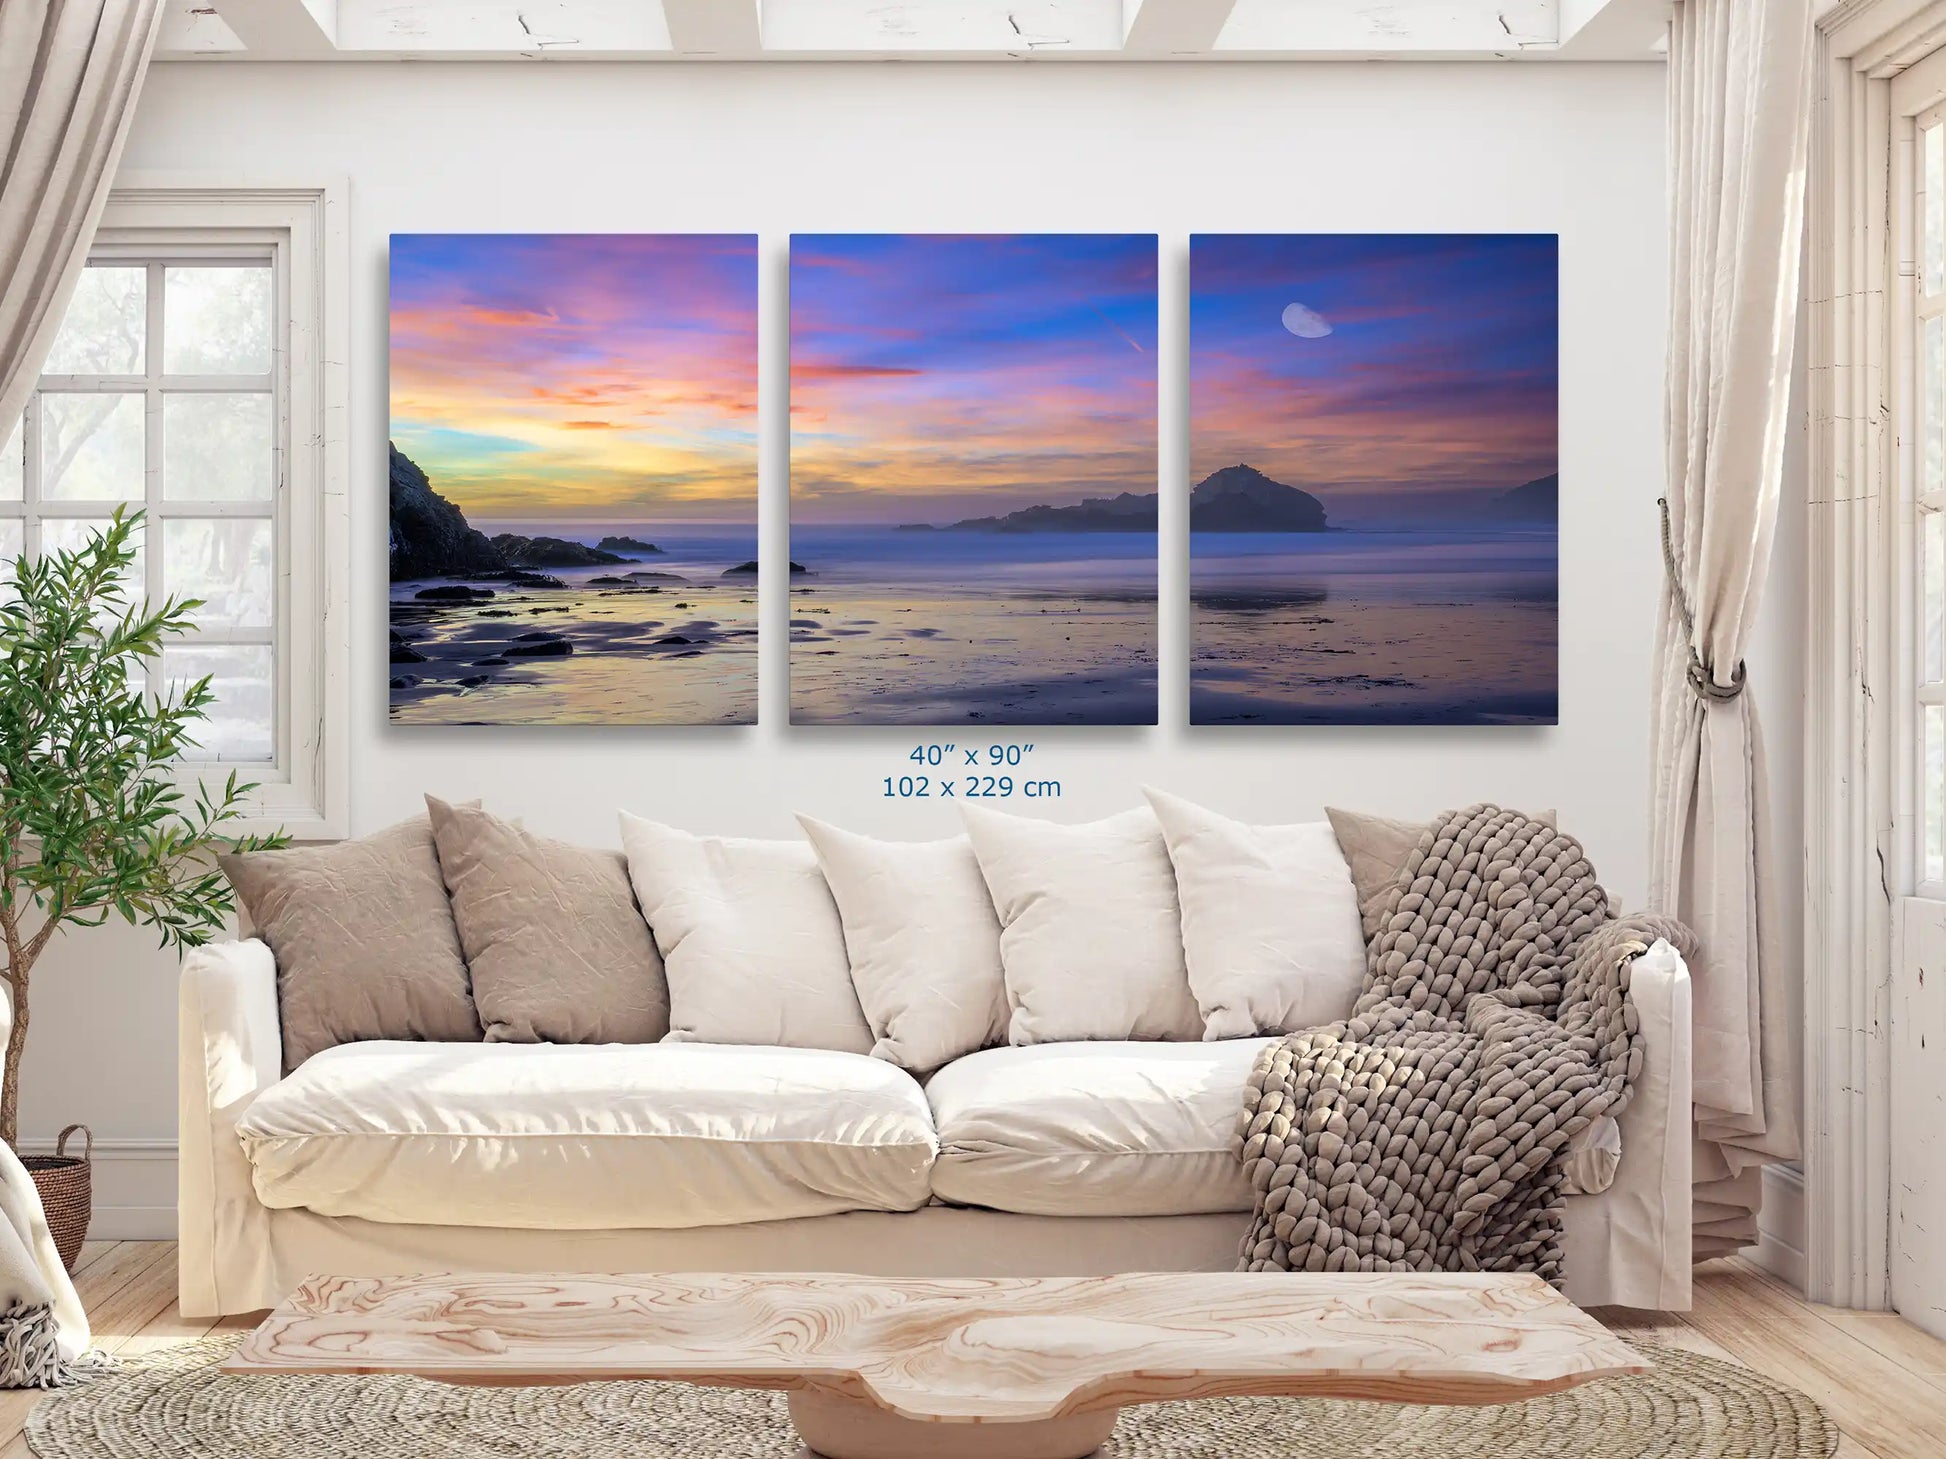 Expansive 40x90-inch three-piece canvas art displaying Big Sur's moonlit purple sands, transforming a living room into a serene escape.